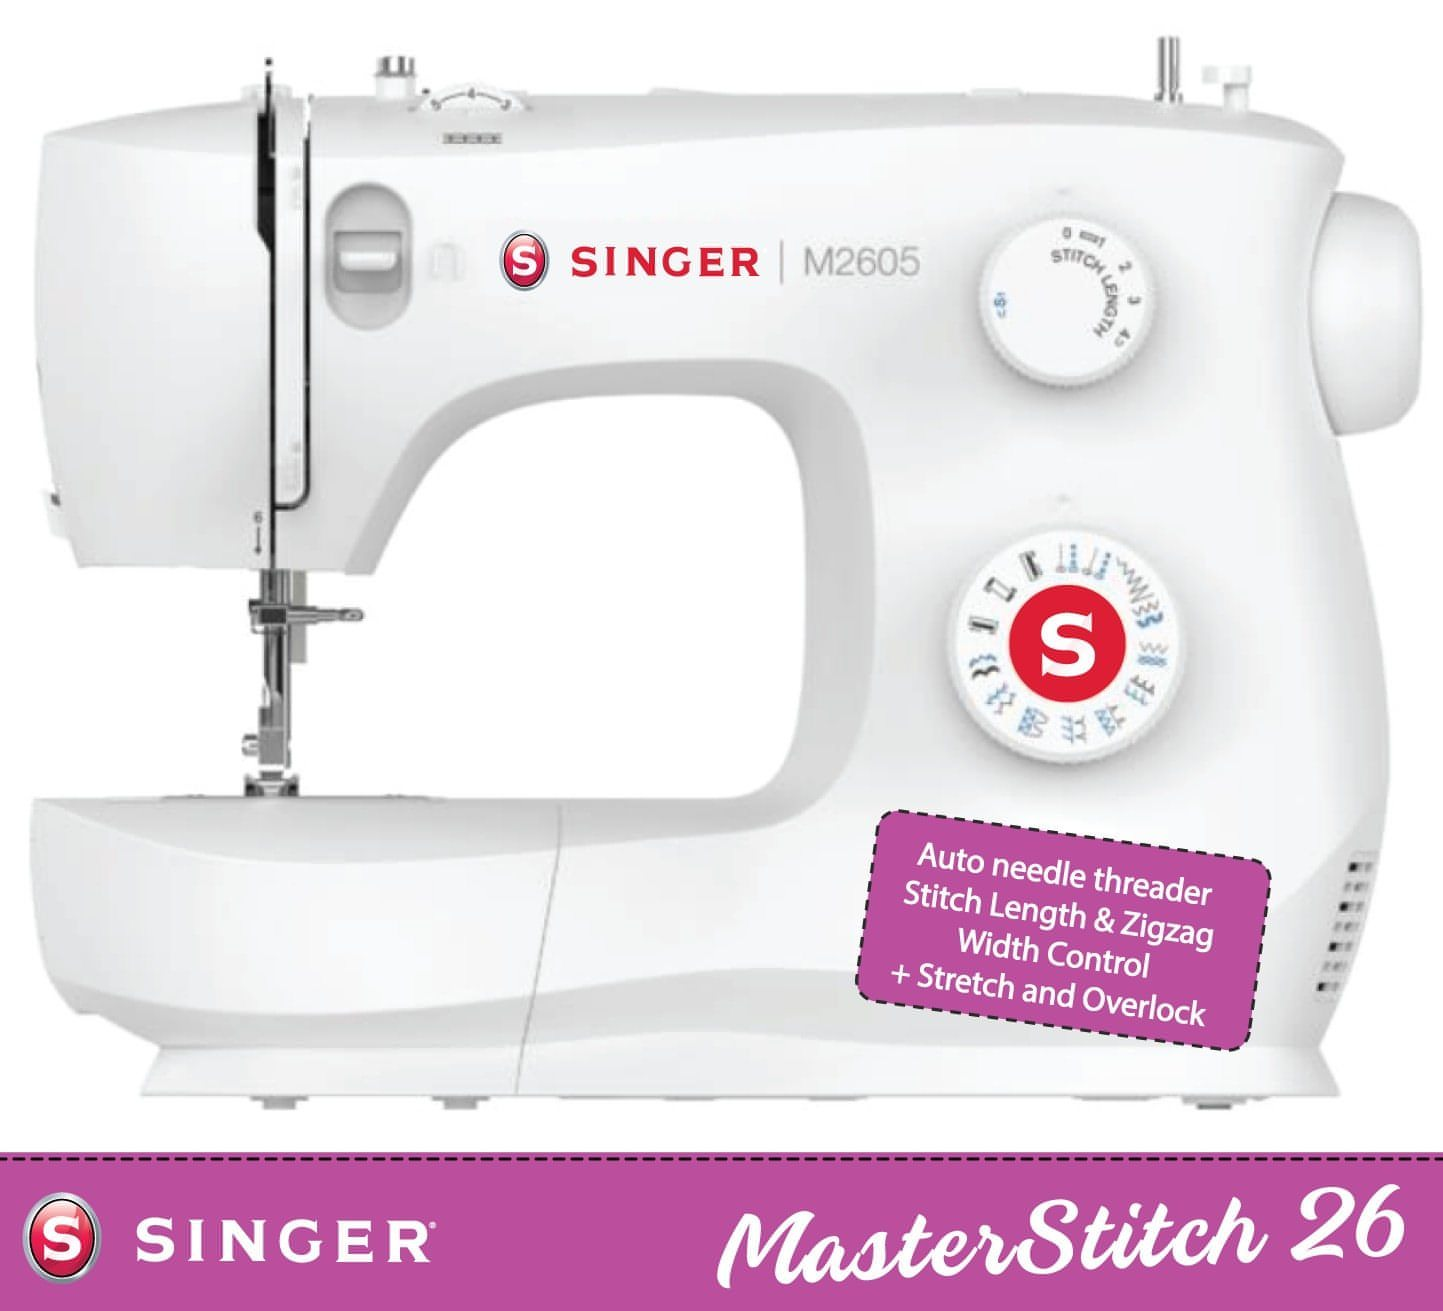 Singer M2605 Sewing Machine - 21 stitch patterns with stitch length and zig zag width control + auto needle threader﻿